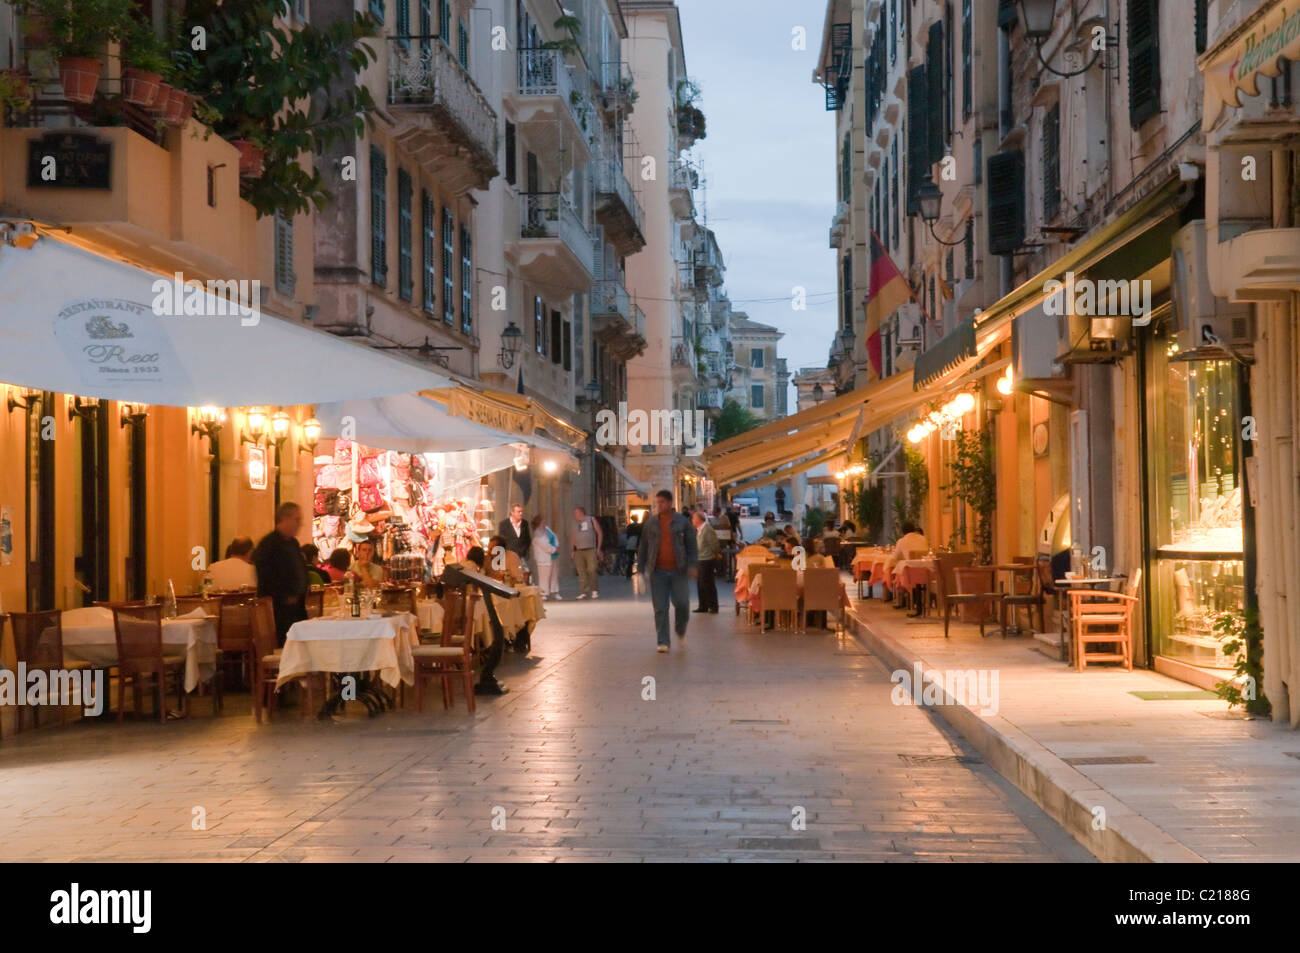 Corfu, Greece. October. In the streets of Corfu Town. Evening. Stock Photo